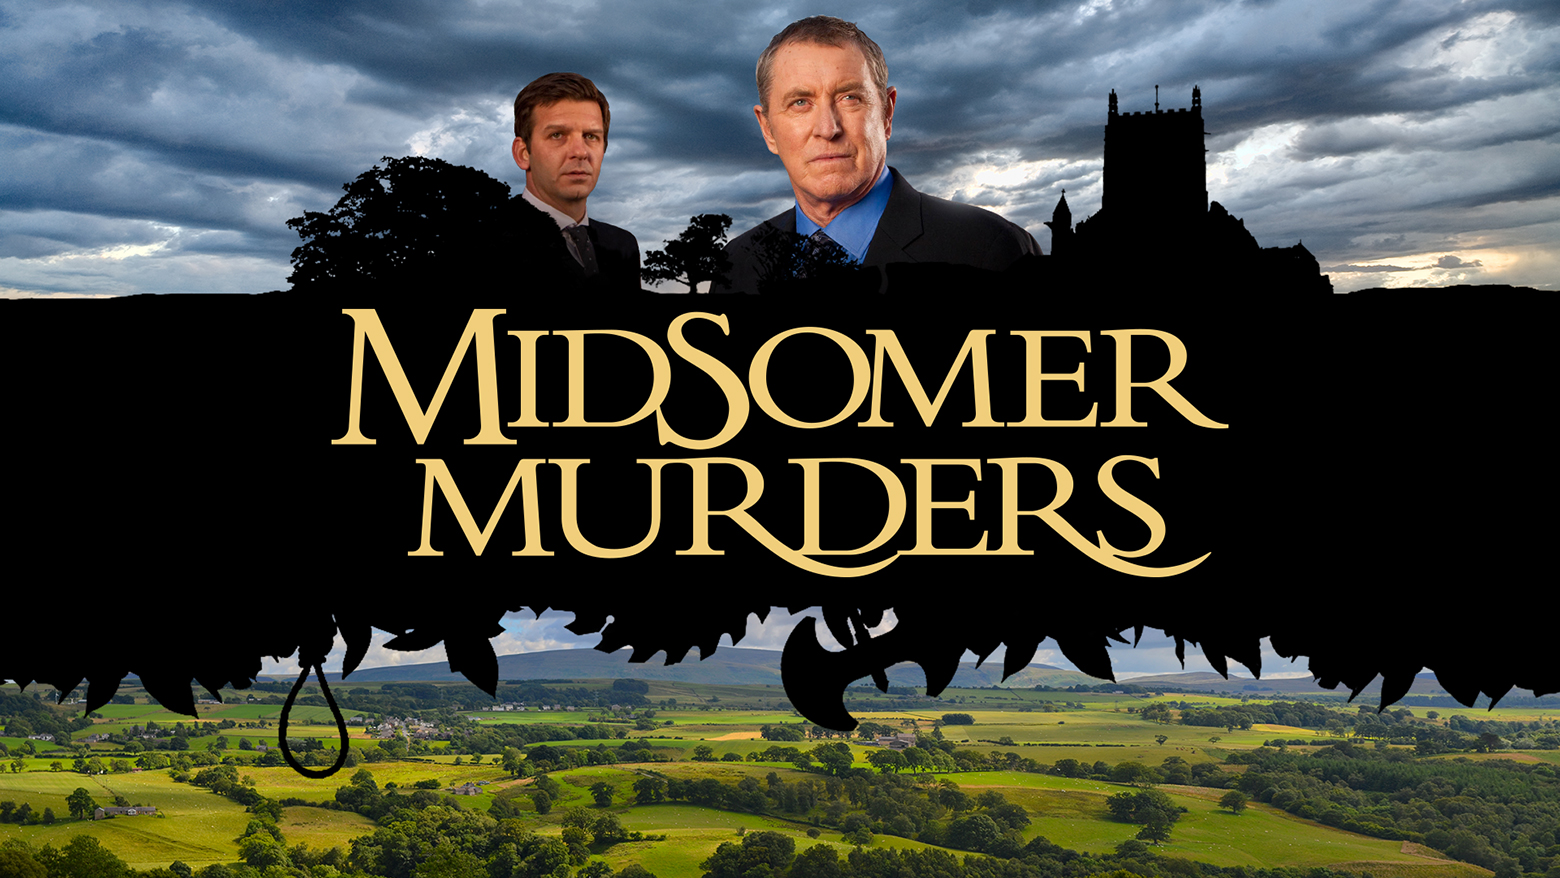 Pluto Tv Launches A New Channel Dedicated To The Hit British Show Midsomer Murders Cord Cutters News